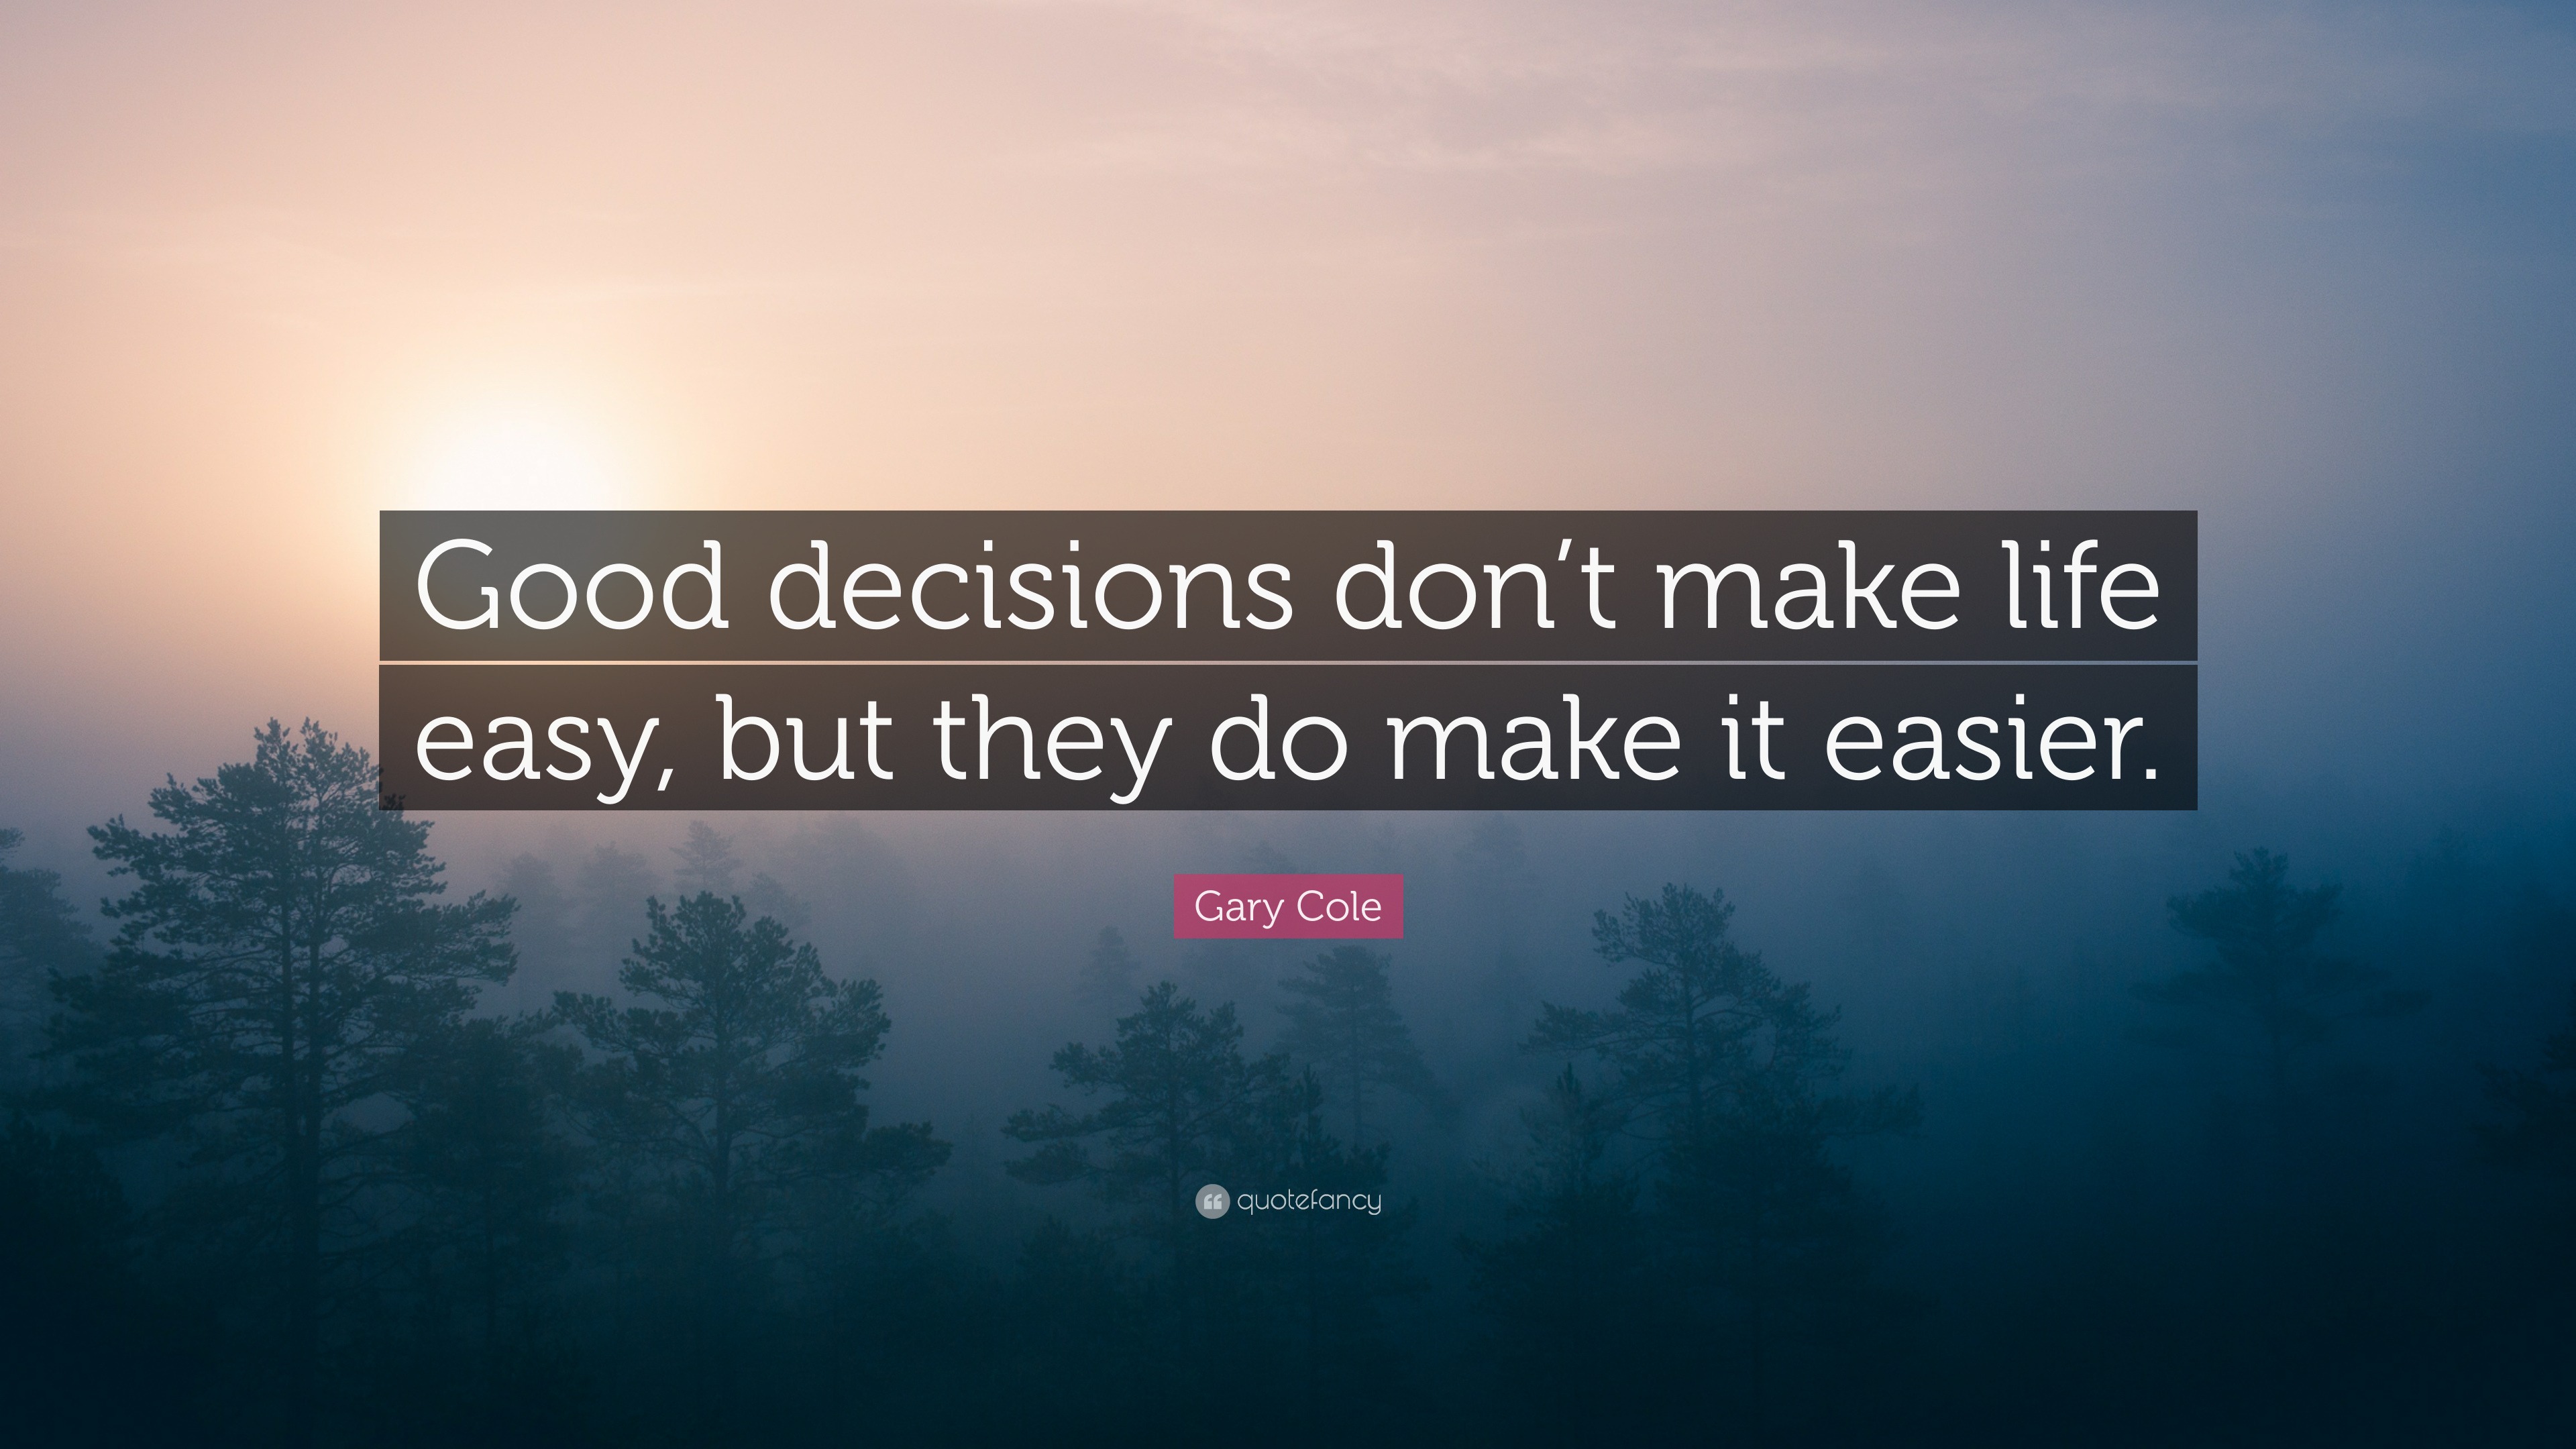 Gary Cole Quote: “Good decisions don't make life easy, but they do